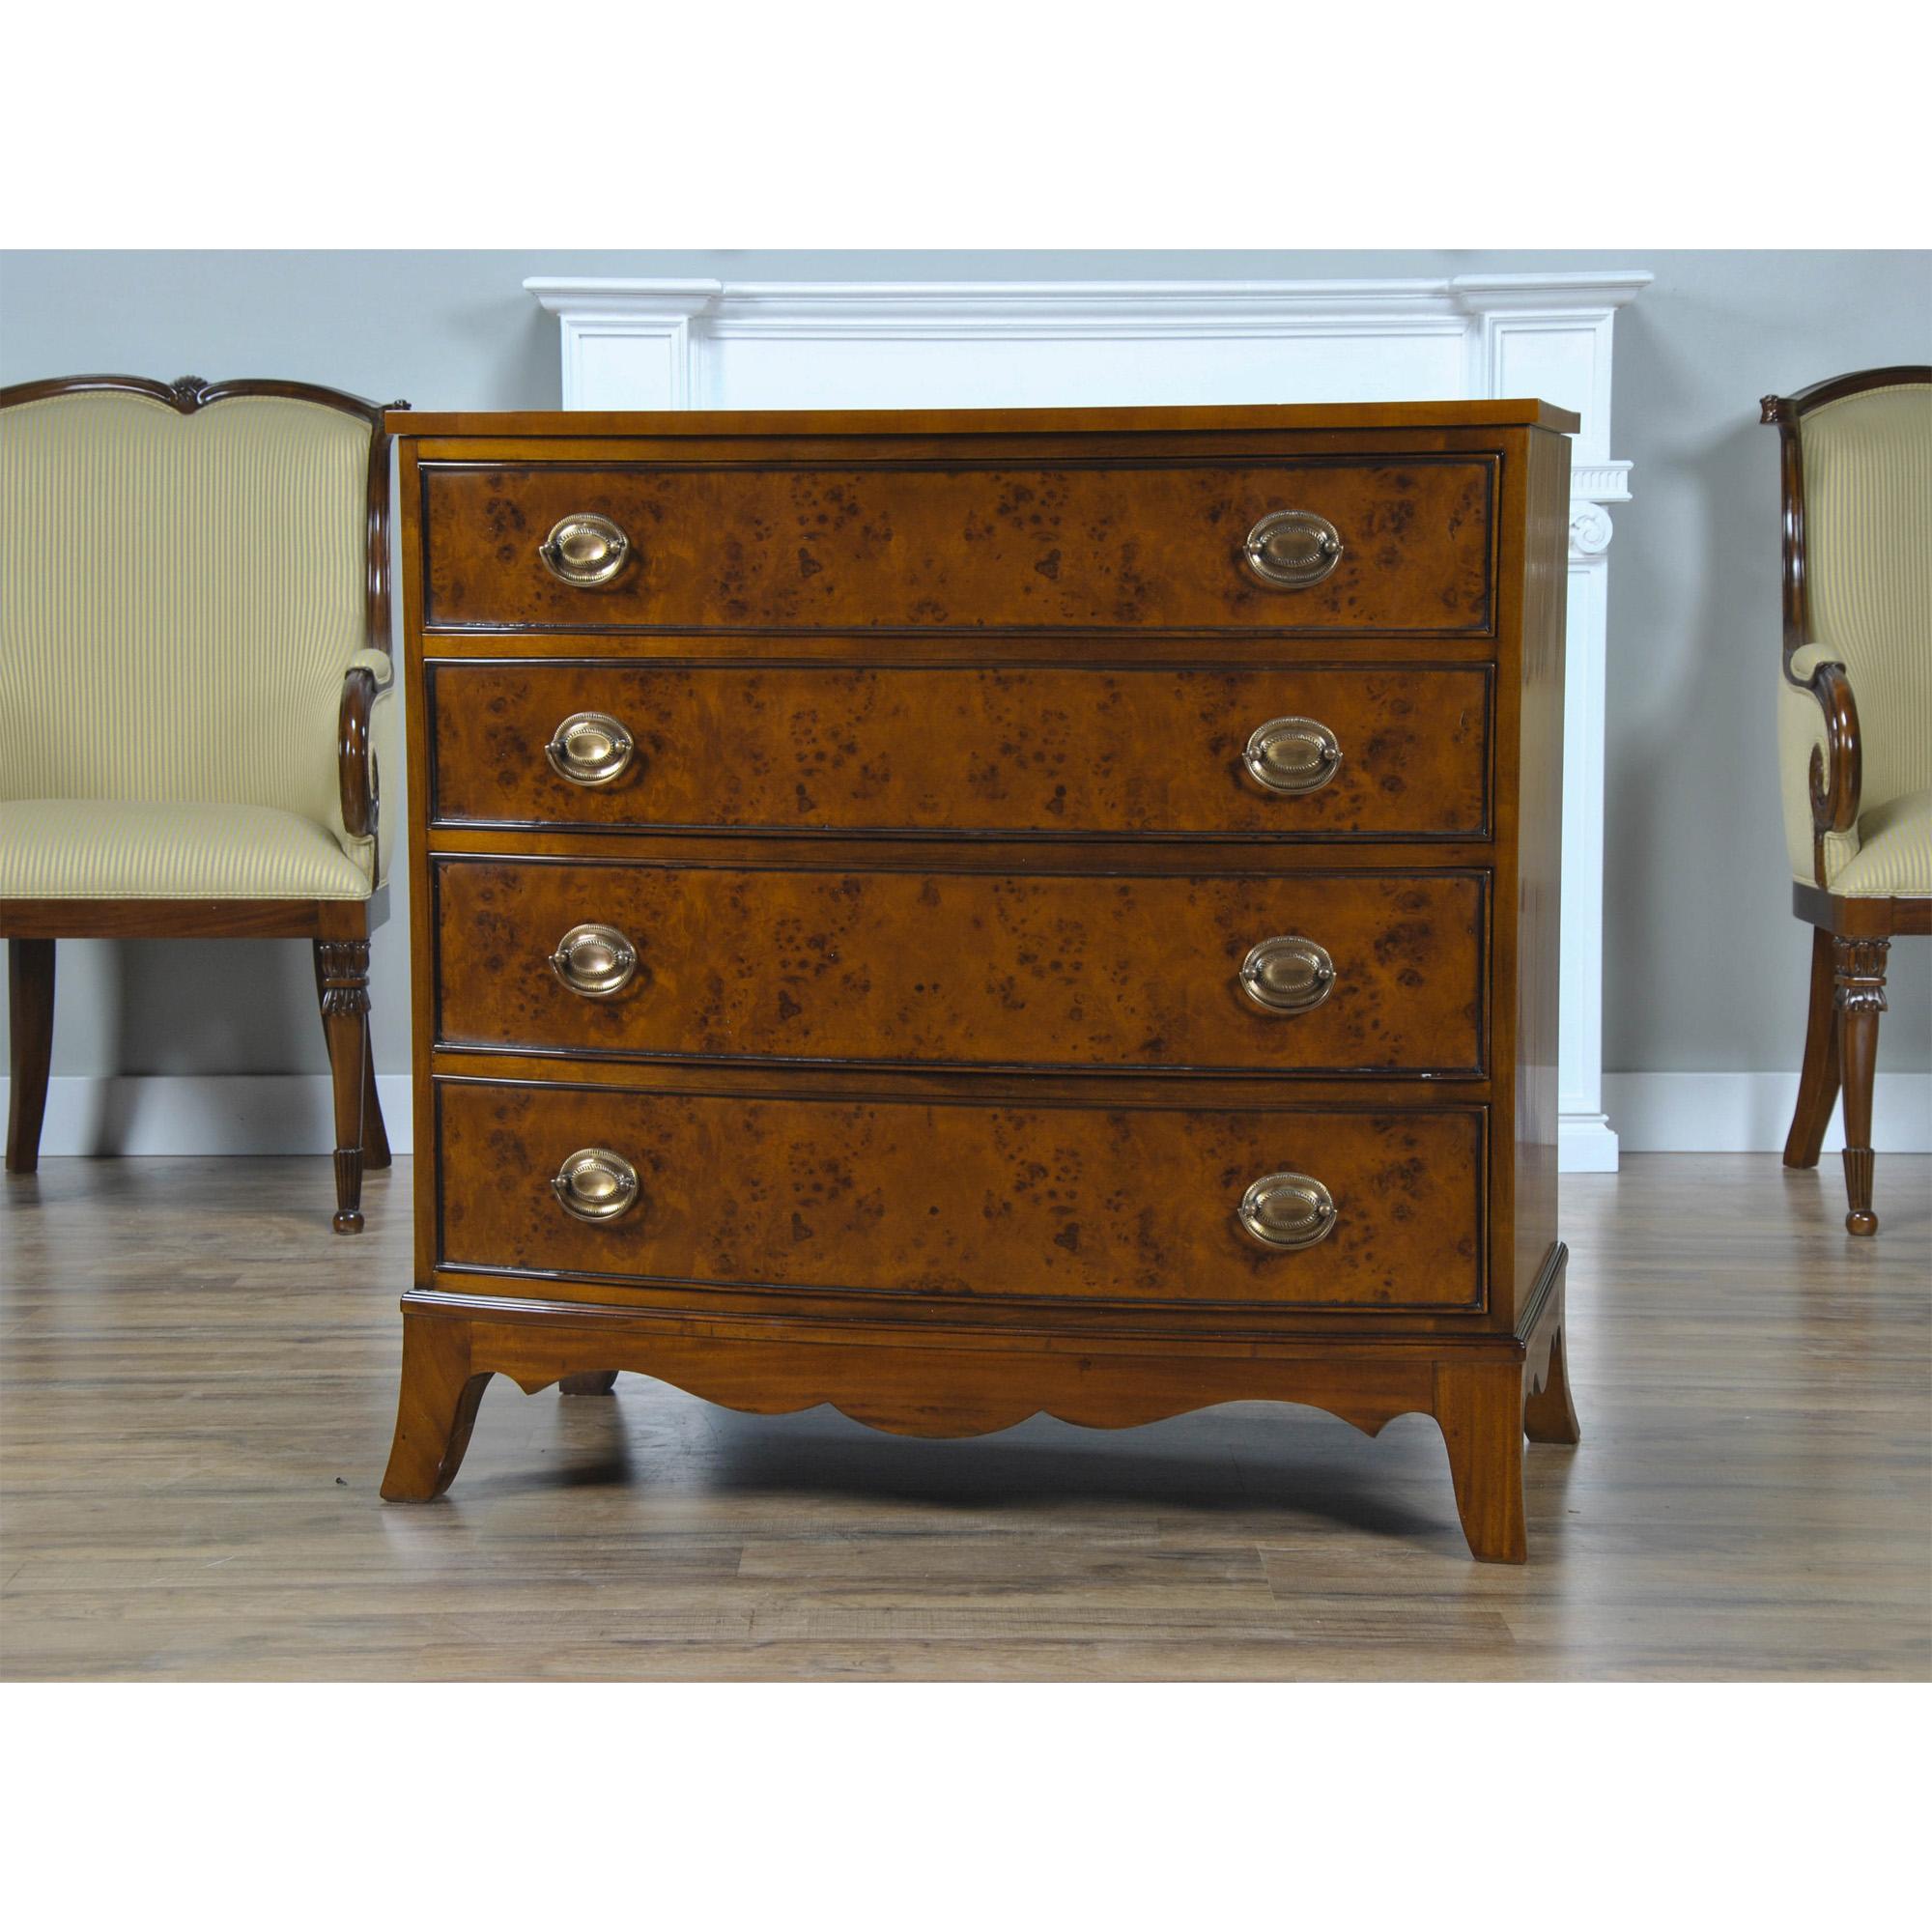 The Bow Front Burled Chest is created using the finest burl wood veneers available. This fine quality Chest is elegant in design while providing a lot of storage space in it’s four graduated drawers. Classic solid brass hardware, a shaped skirt and